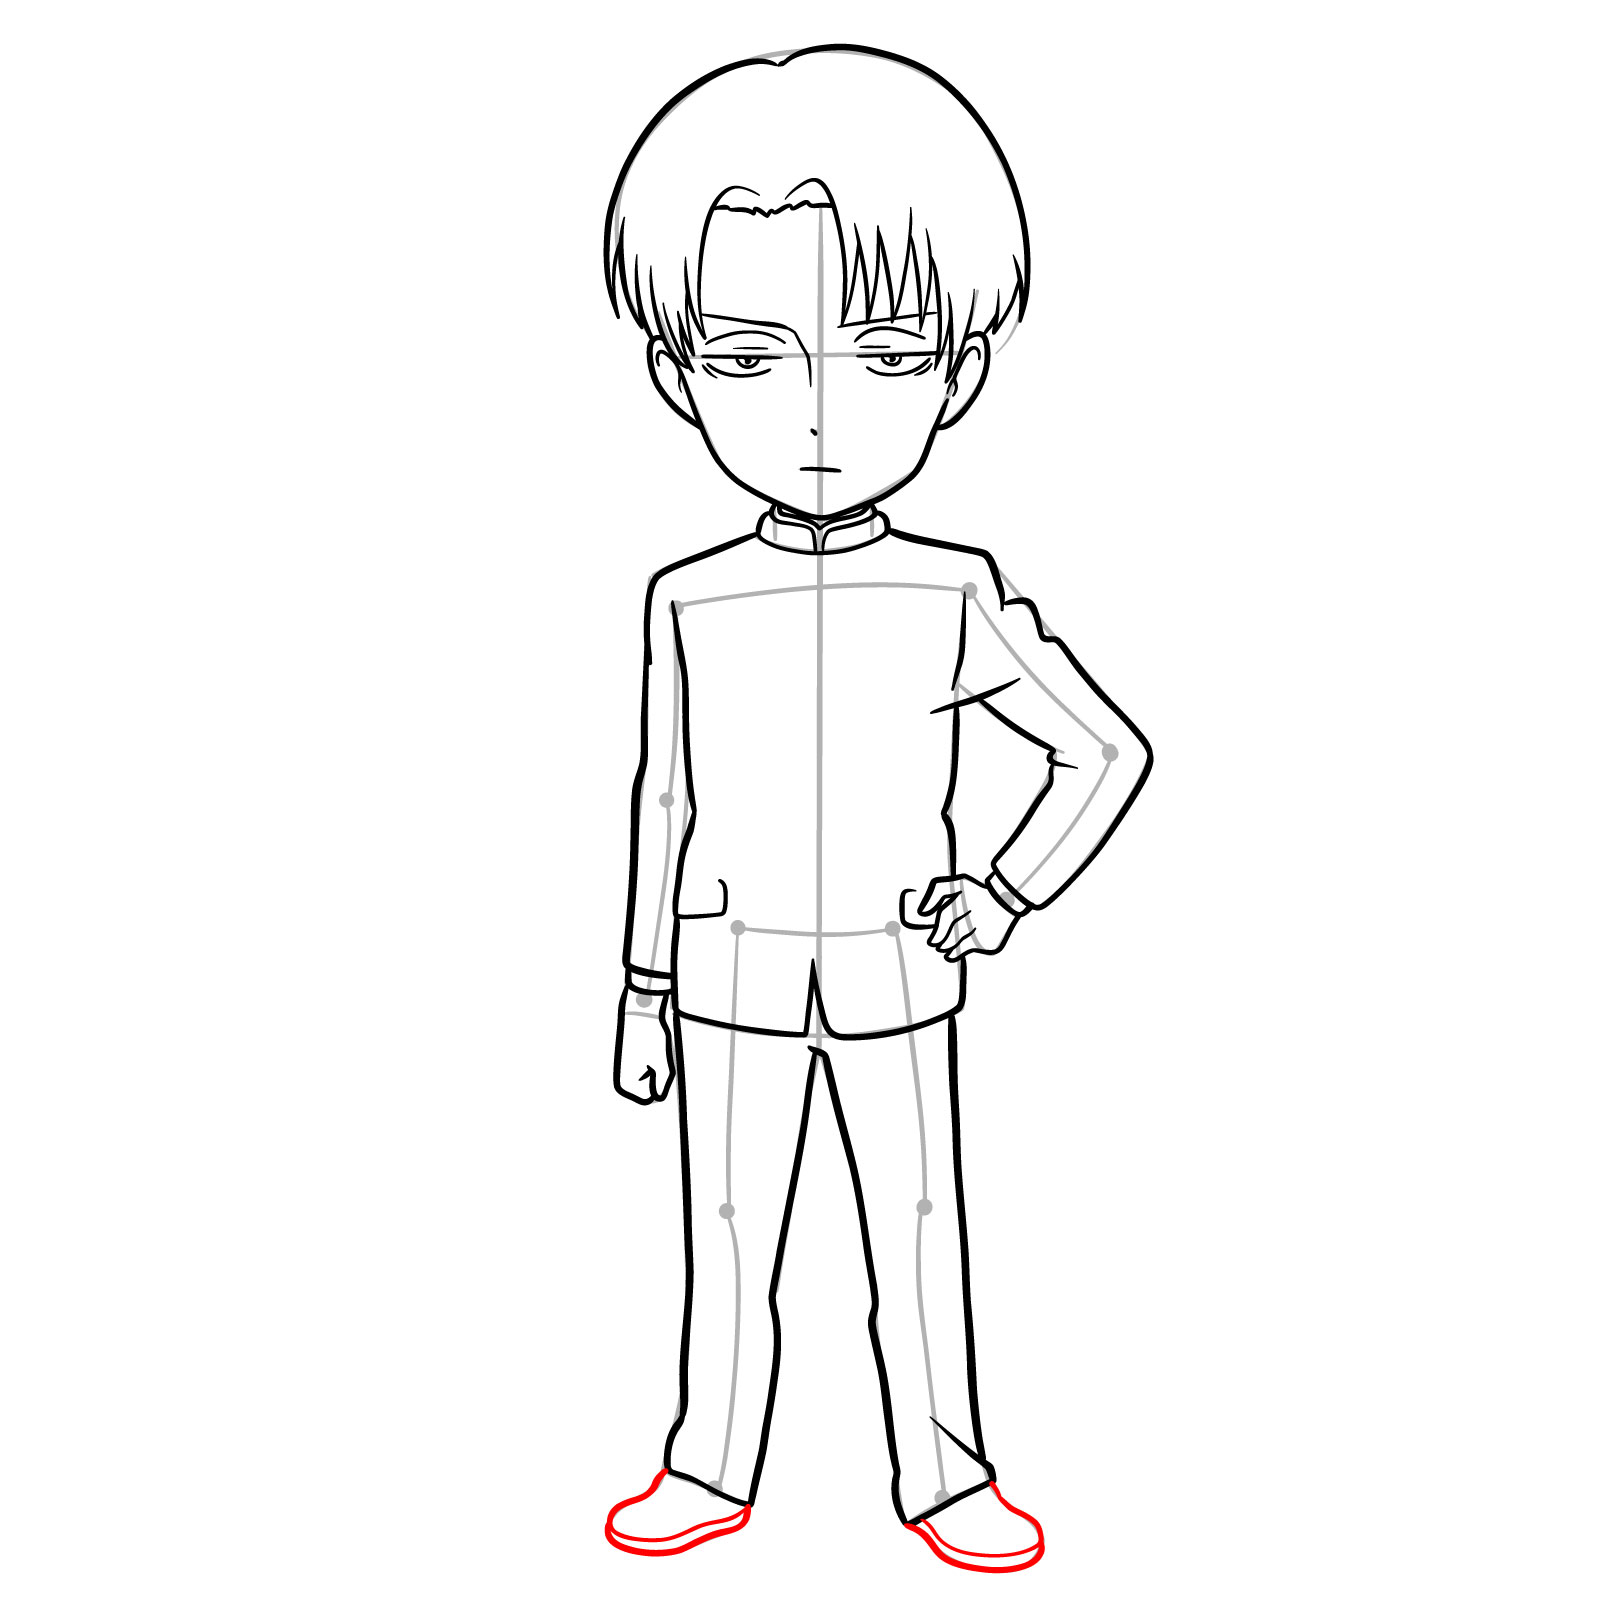 Chibi Captain Levi's shoes added to the drawing guide - step 17